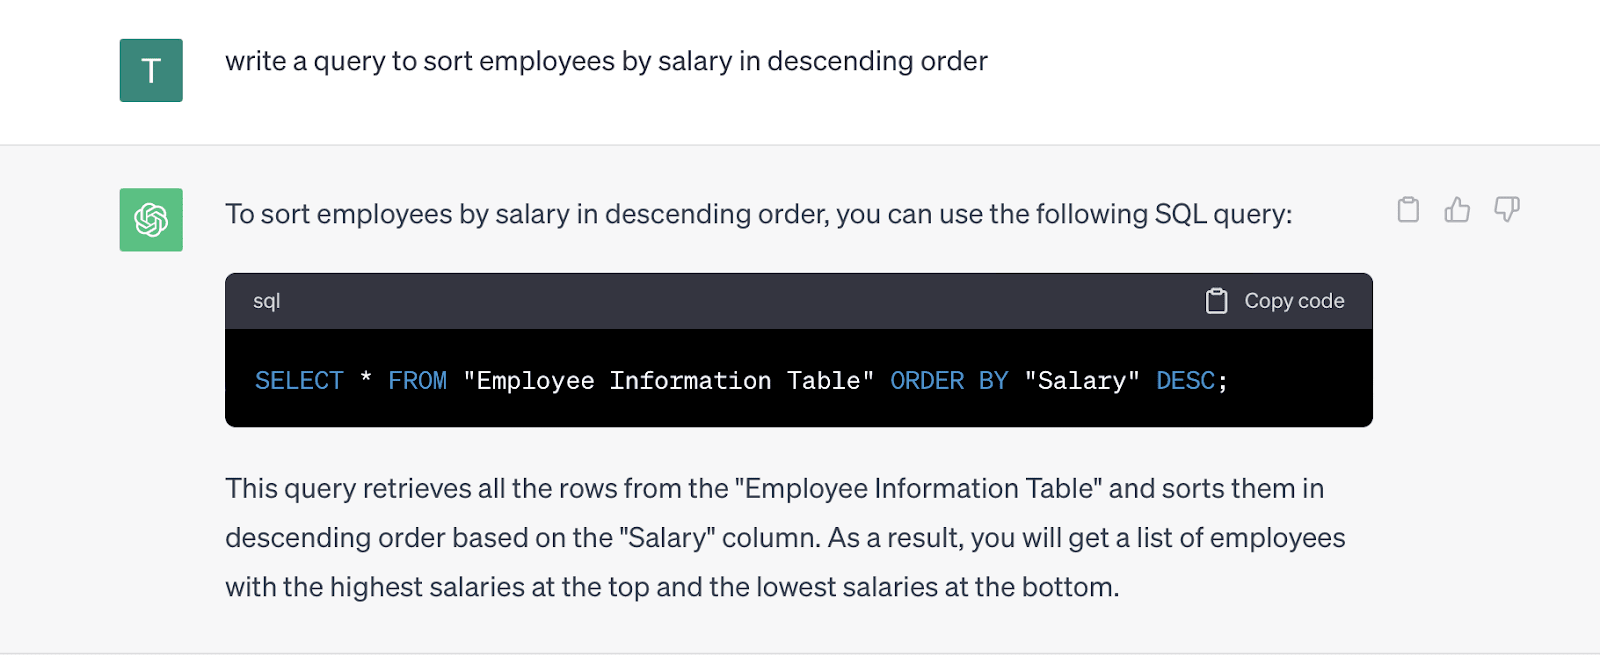 Large language models tutorial — you can also use a query similar to the one below to sort employees by salary in descending order.